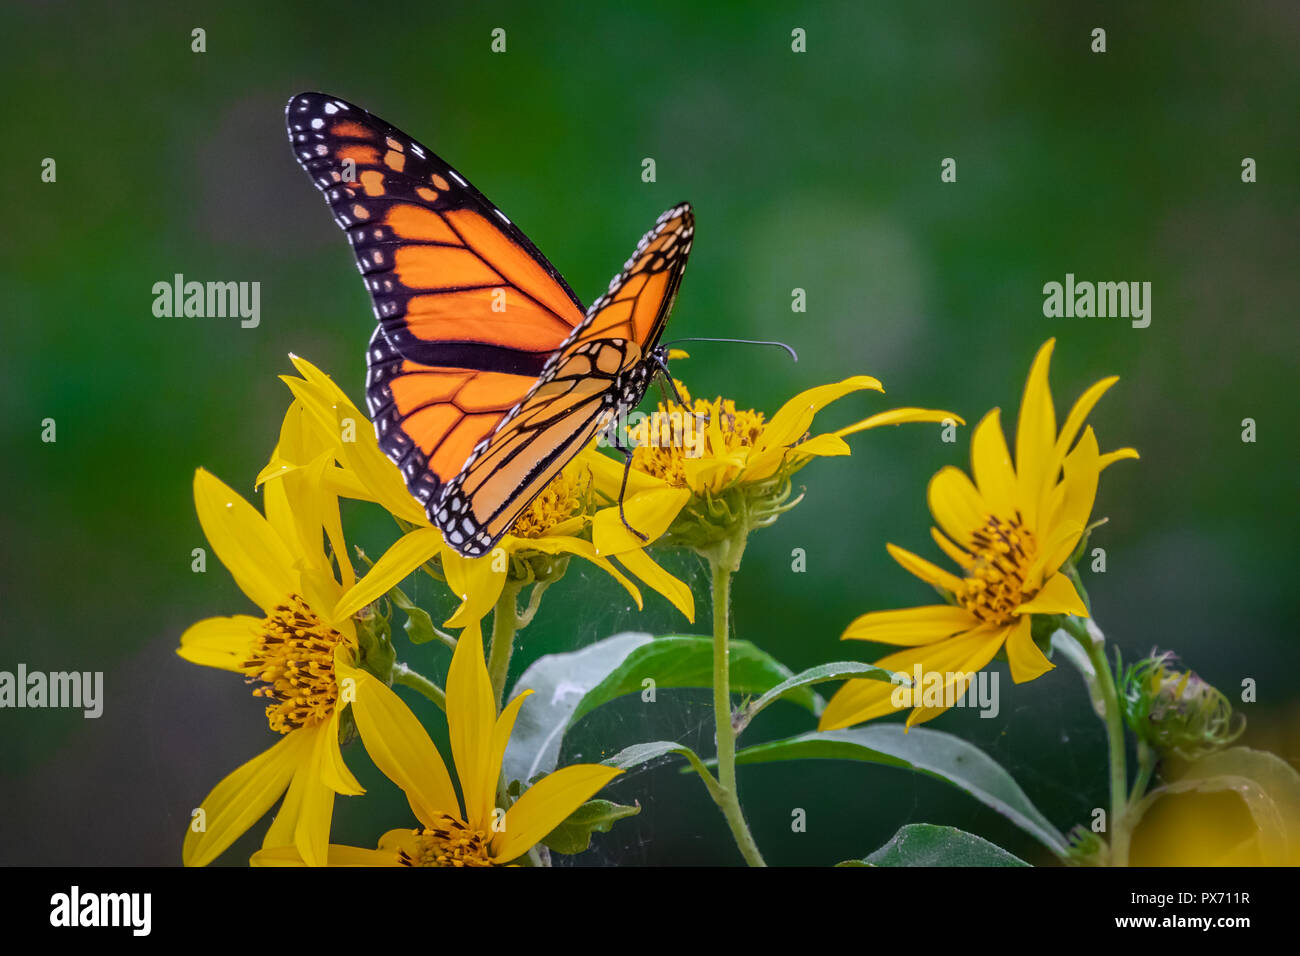 A Monarch butterfly (Danaus plexippus) perched on Sunflowers Stock Photo